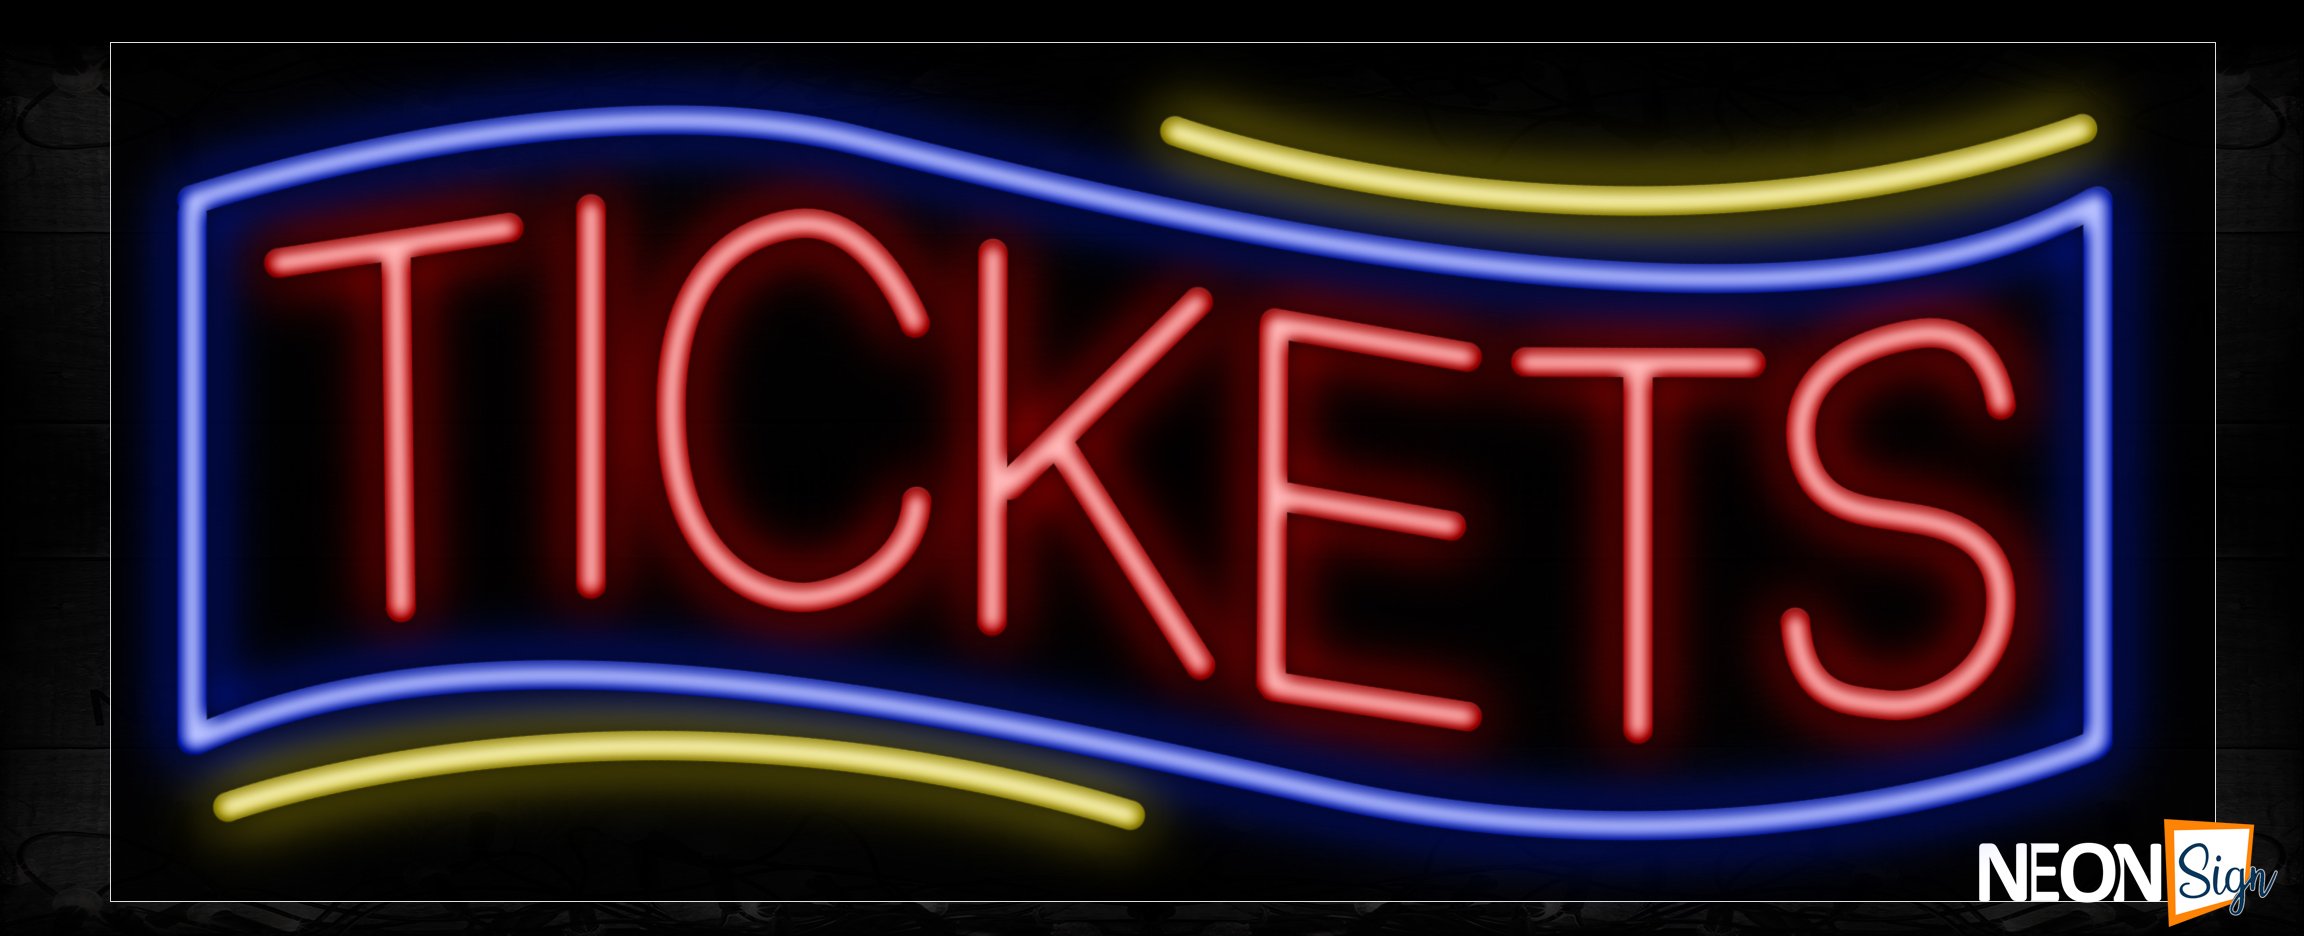 Image of 10921 Tickets in red with blue border and yellow lines Neon Sign_13x32 Black Backing